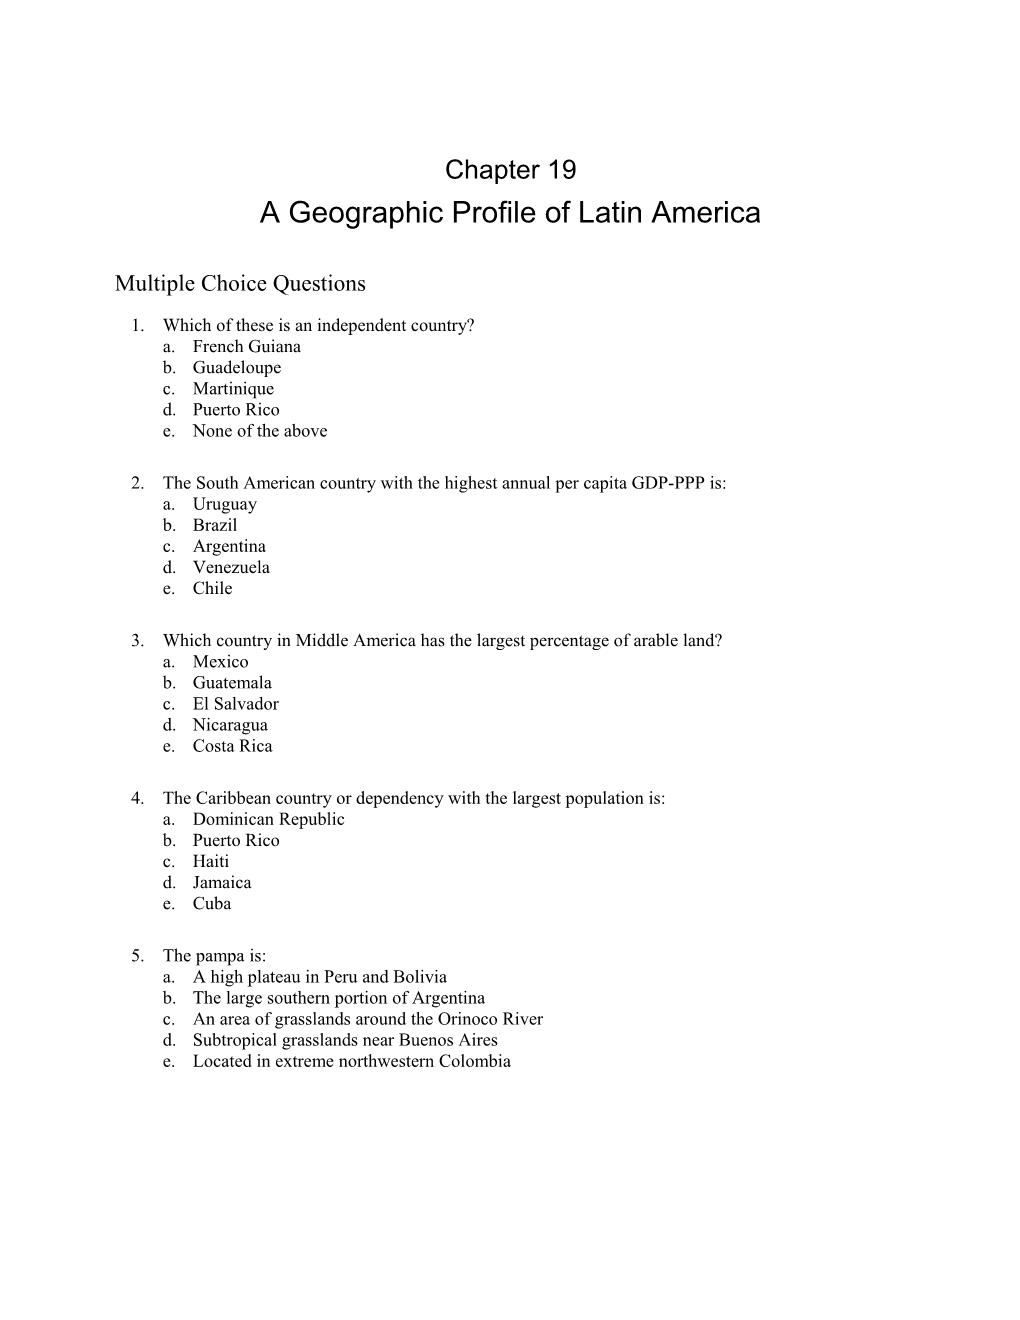 CHAPTER 19 a Geographic Profile of Latin America